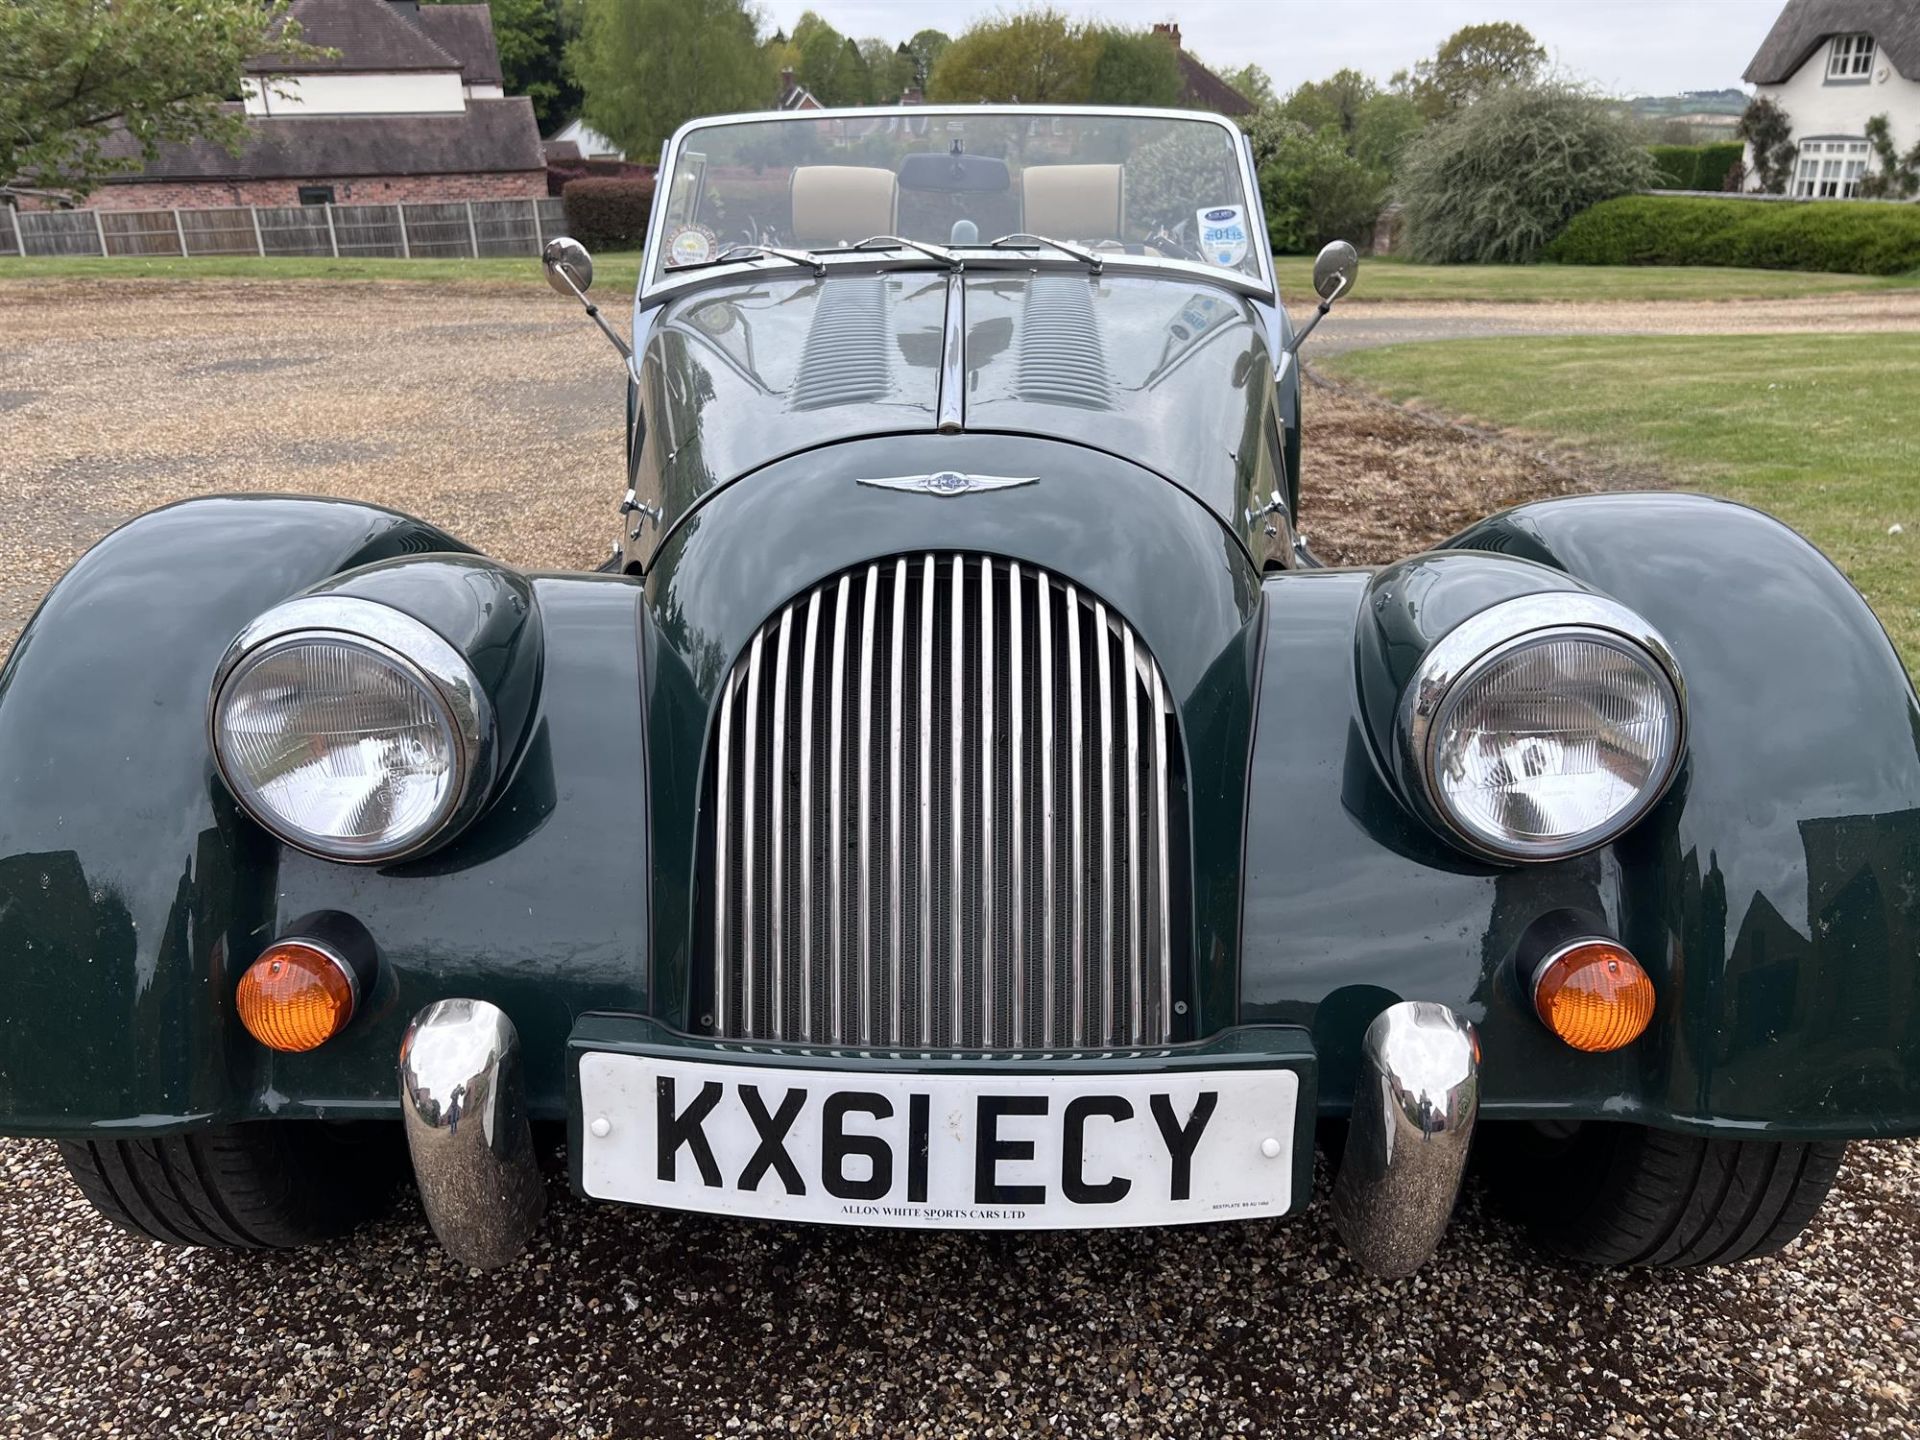 2012 Morgan Plus 4 Two Seater - Image 6 of 10